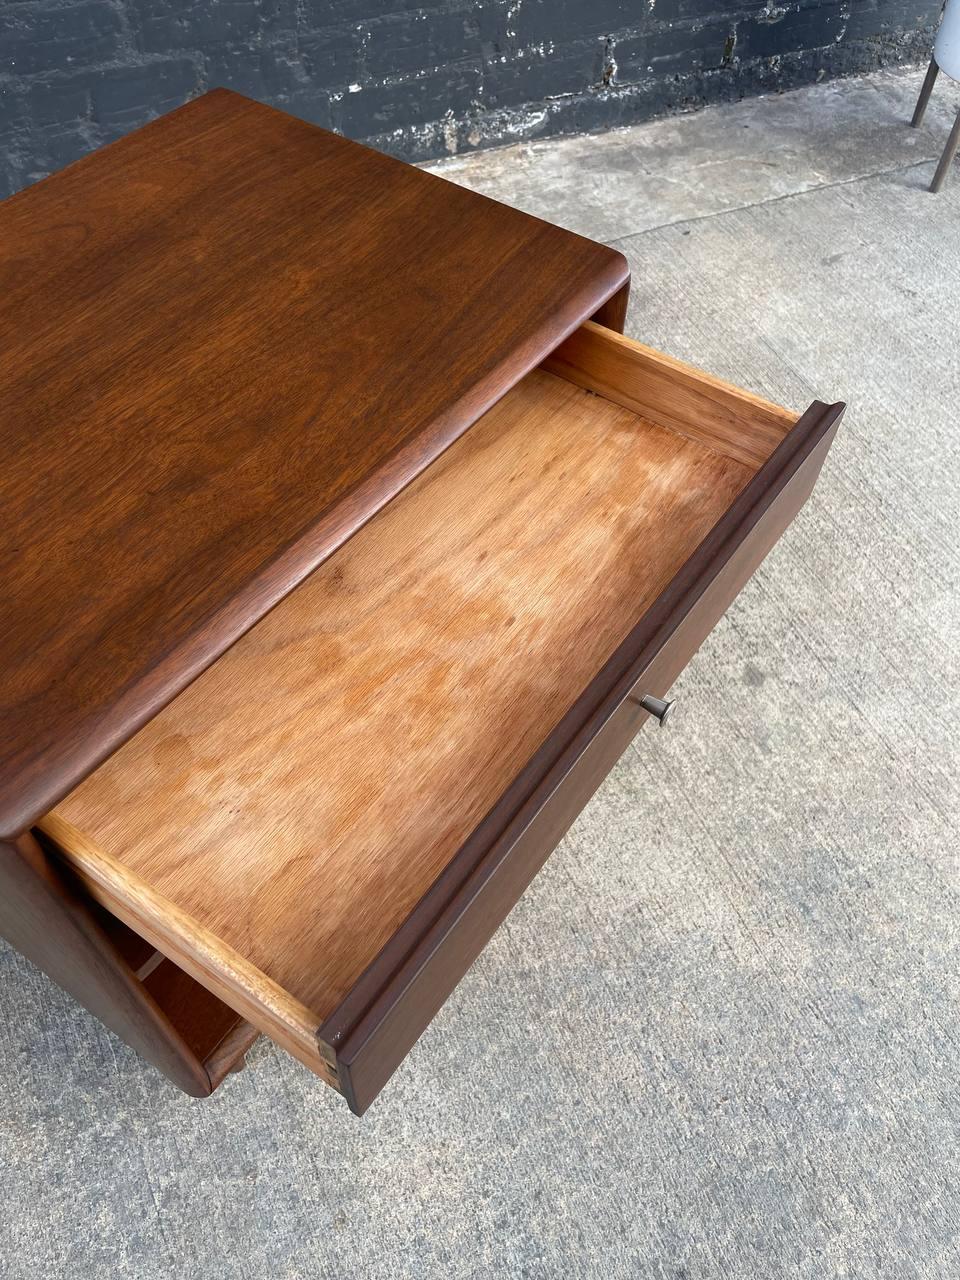 Walnut Newly Refinished - Mid-Century Modern “Parallel” Night Stand by Barney Flagg